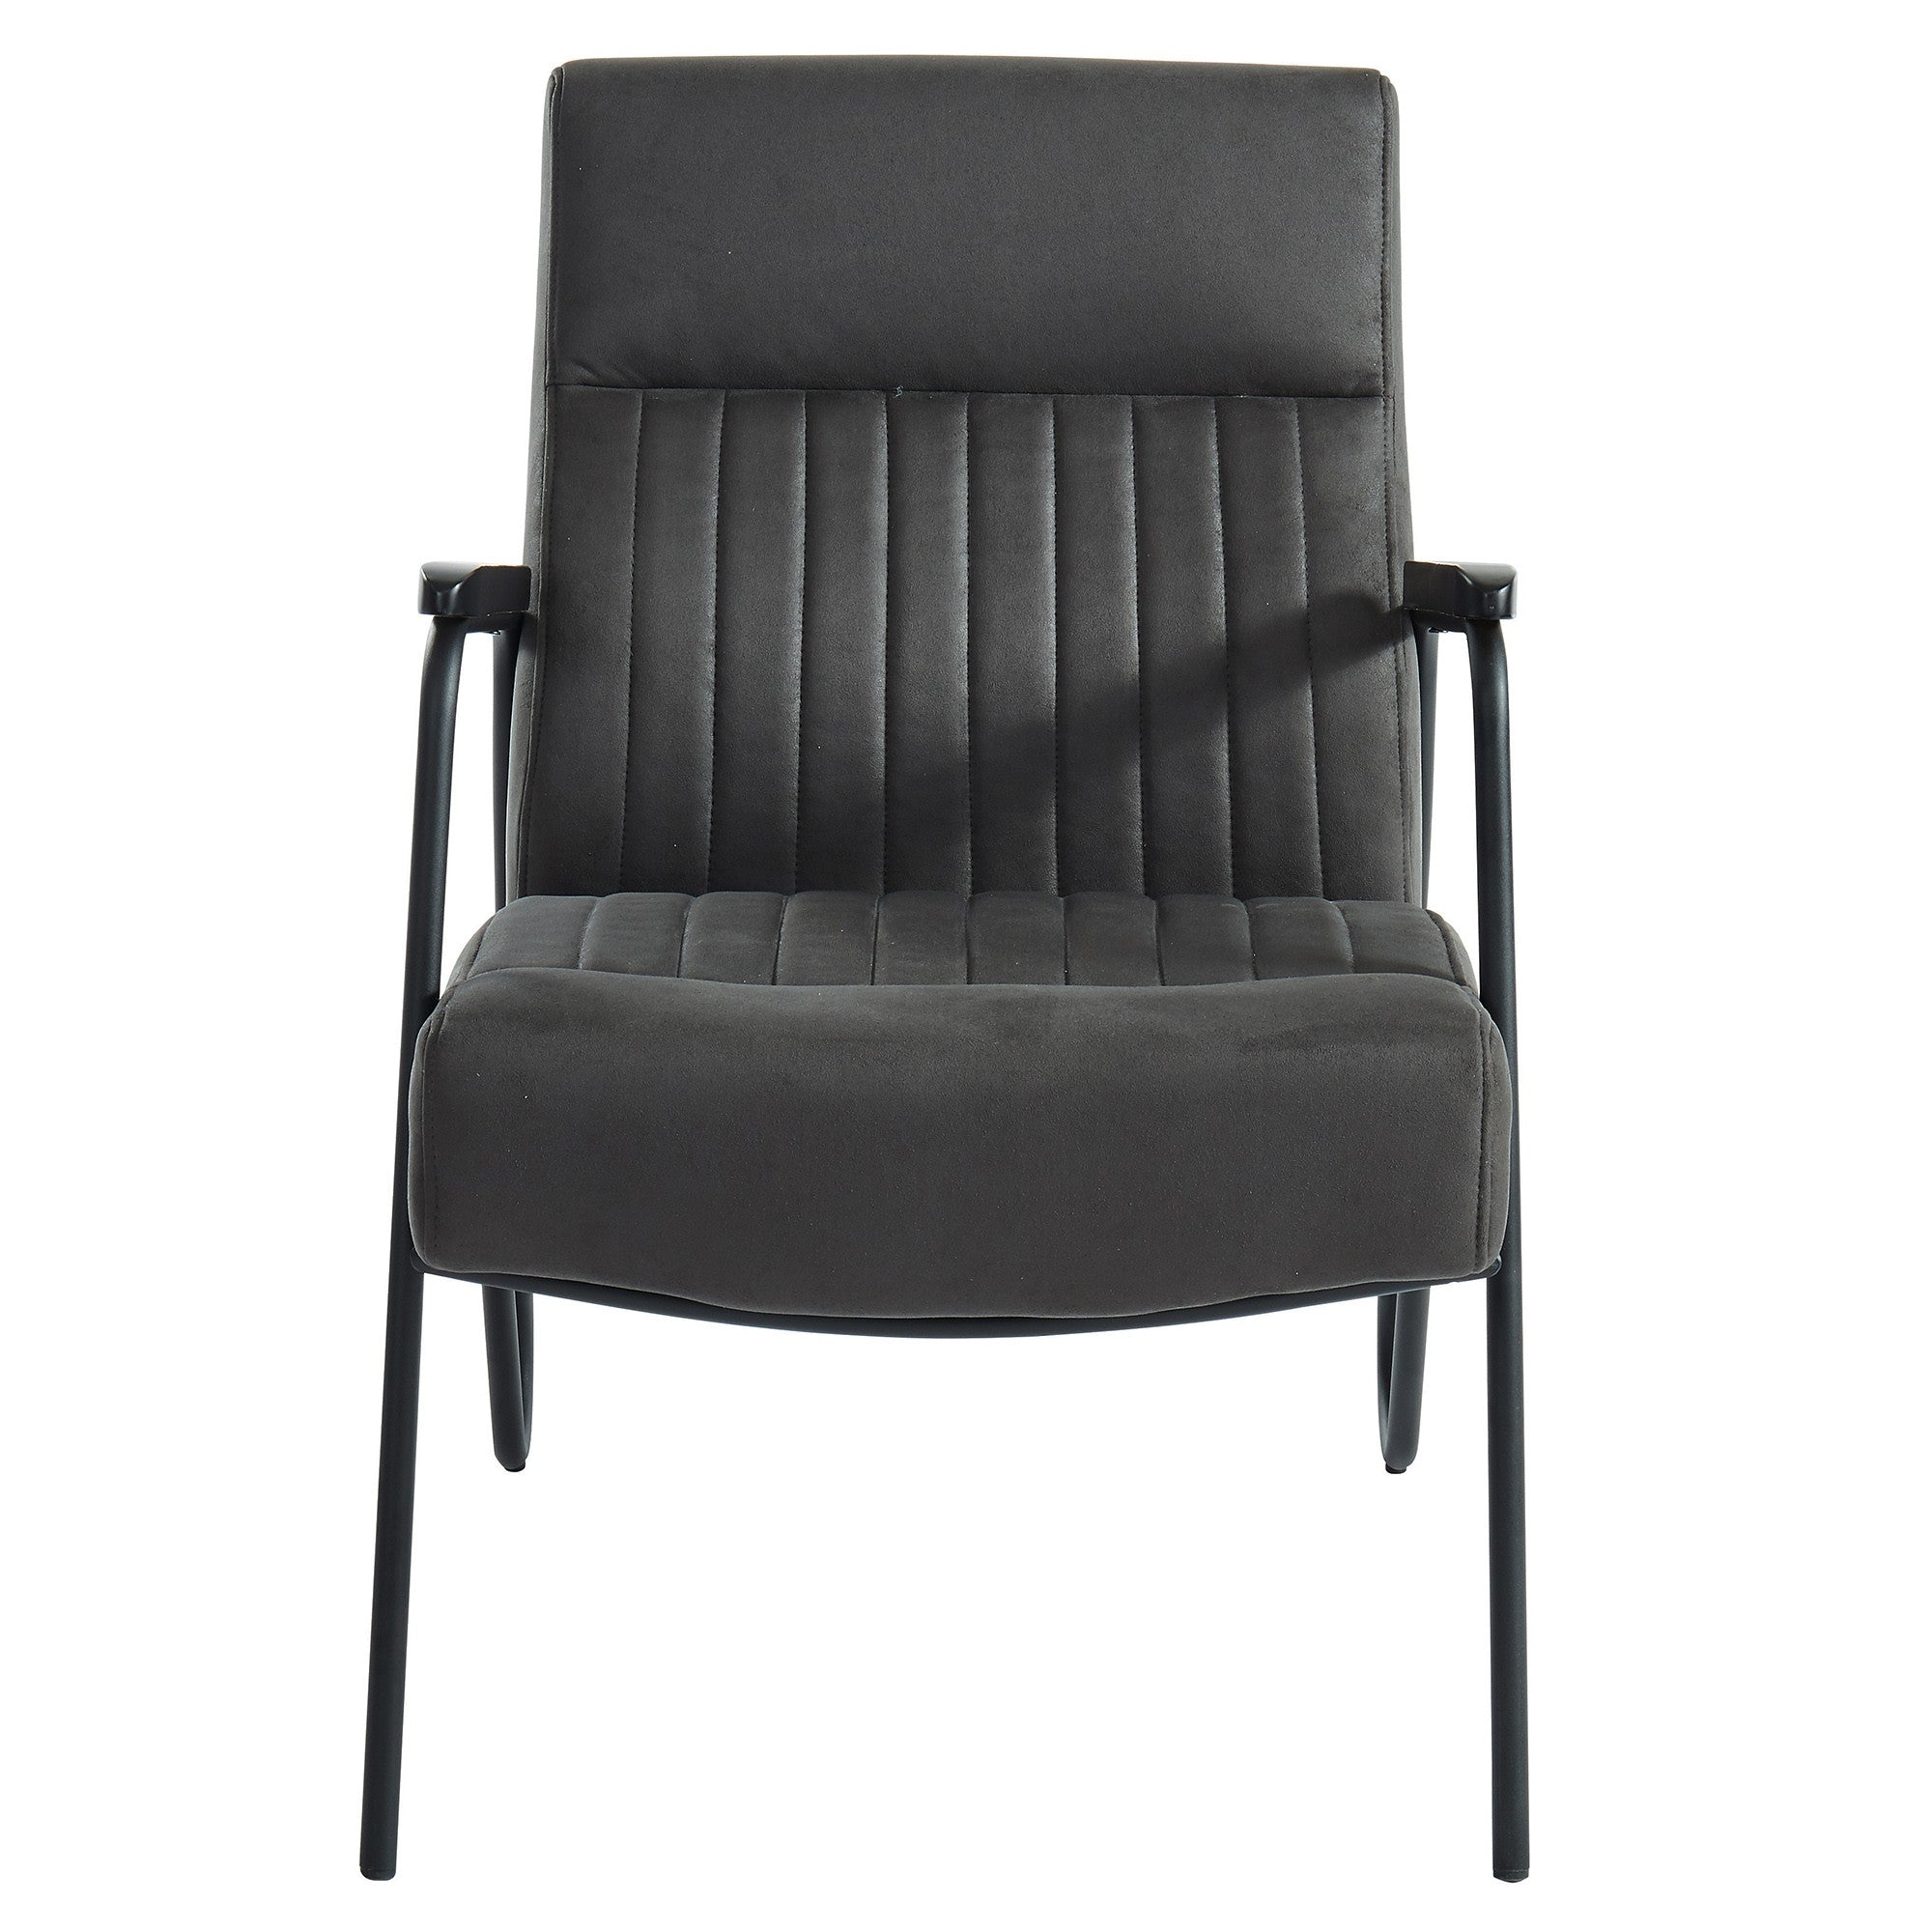 PARADOR-ACCENT CHAIR-VINTAGE GREY - ACCENT SEATING